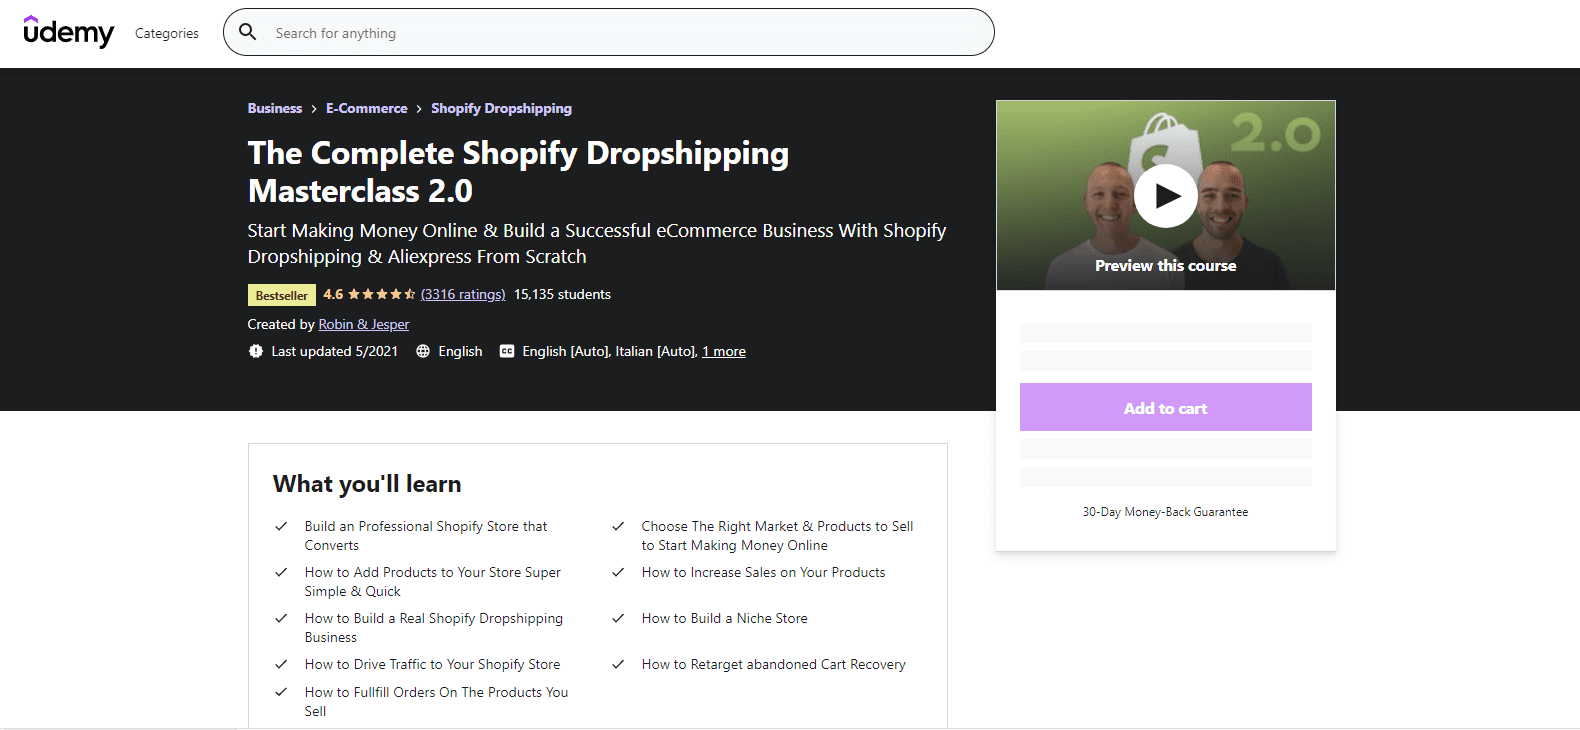 The Complete Shopify Aliexpress Dropship course Make 100k/year